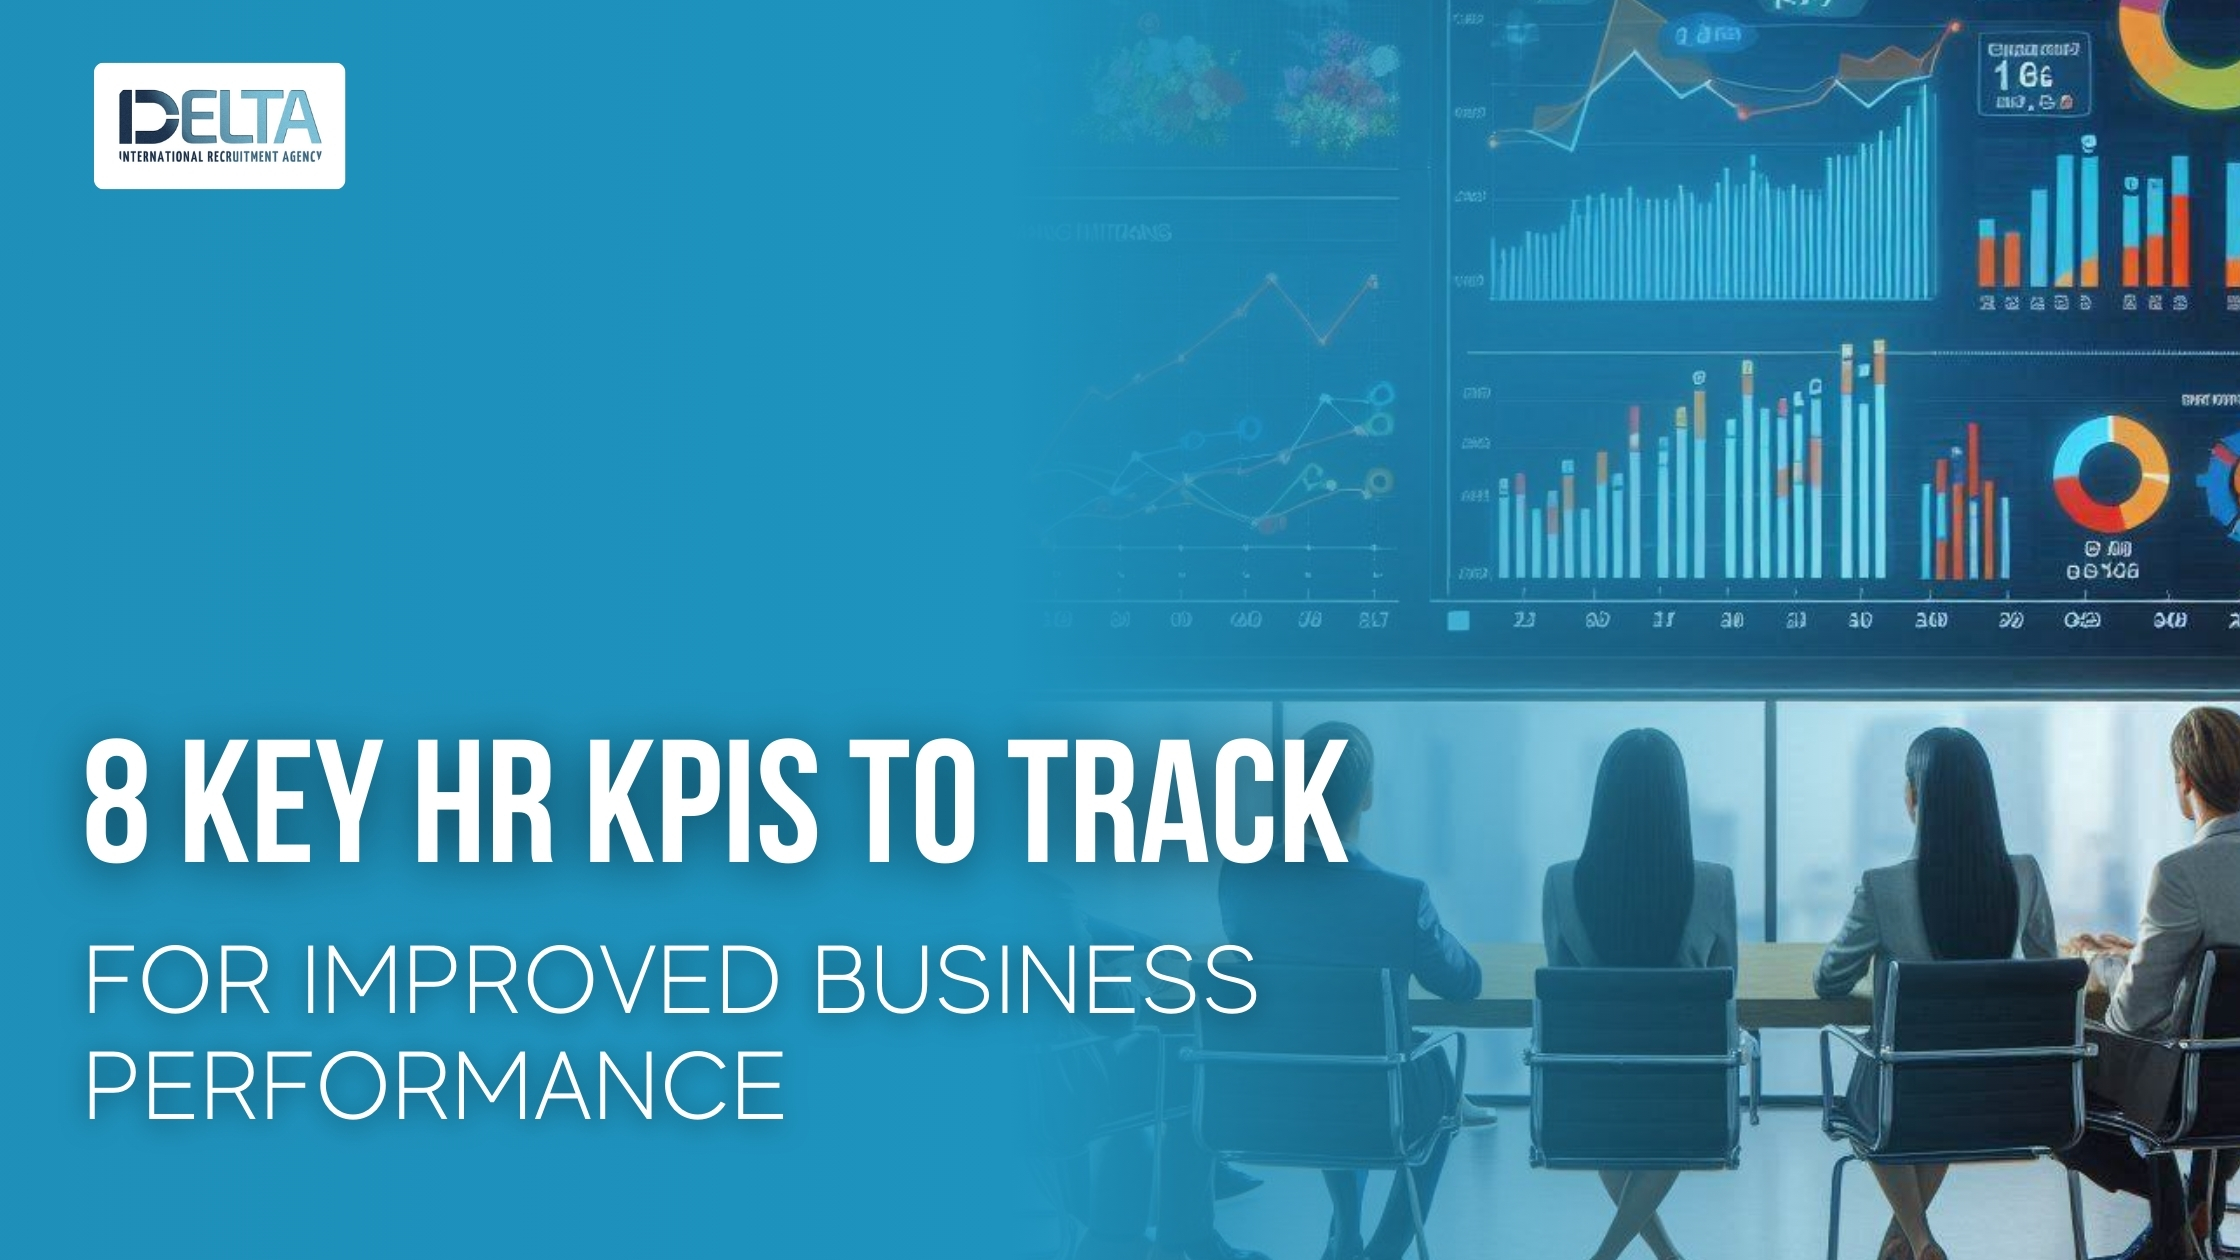 8 Key HR KPIs to Track for Improved Business Performance